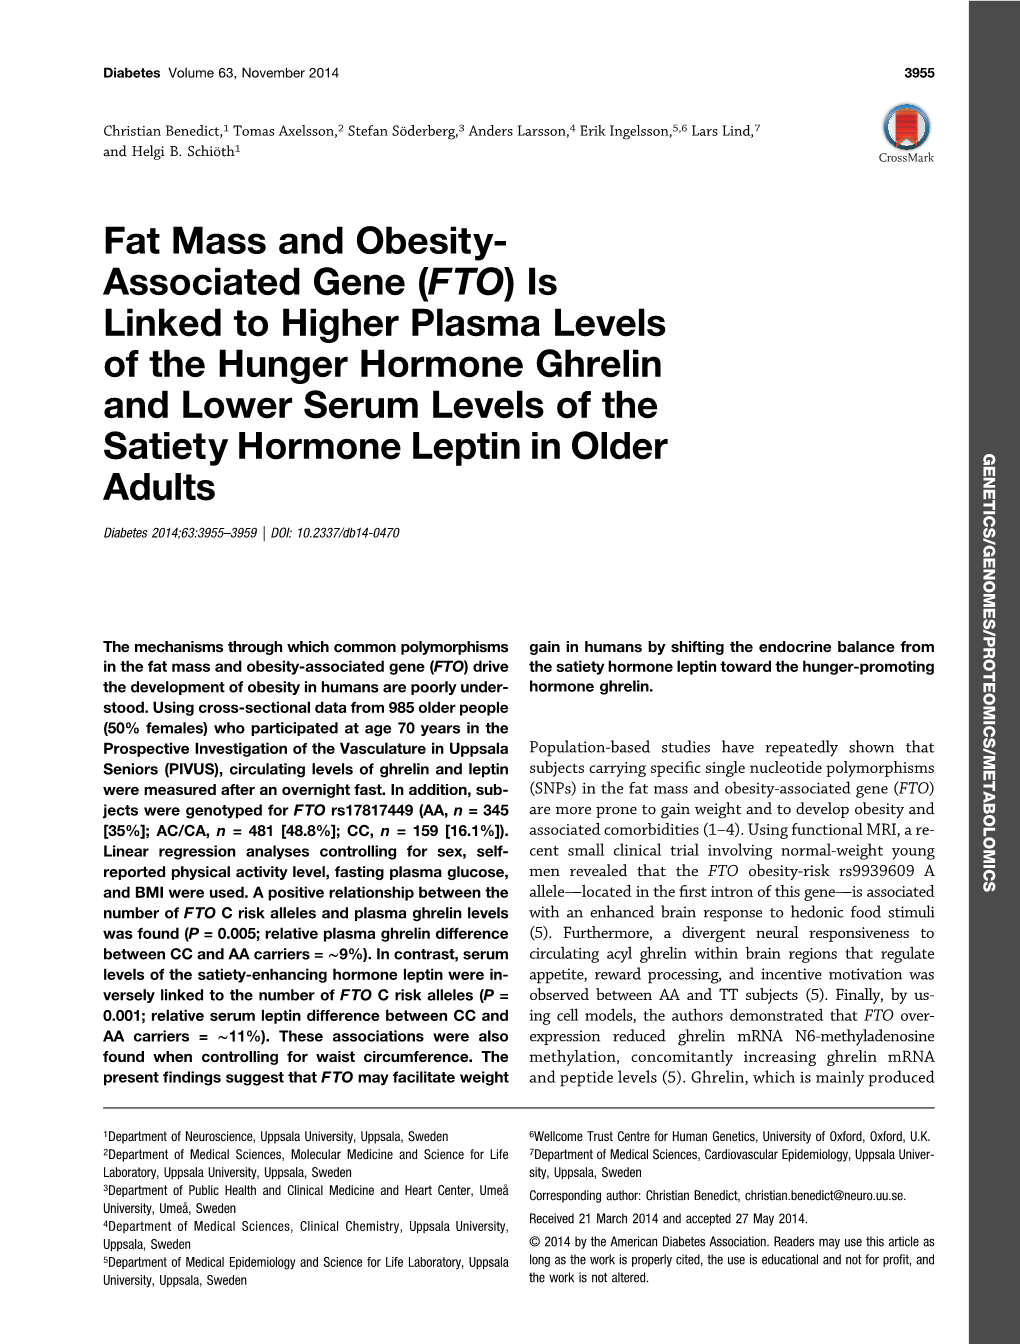 FTO)Is Linked to Higher Plasma Levels of the Hunger Hormone Ghrelin and Lower Serum Levels of The